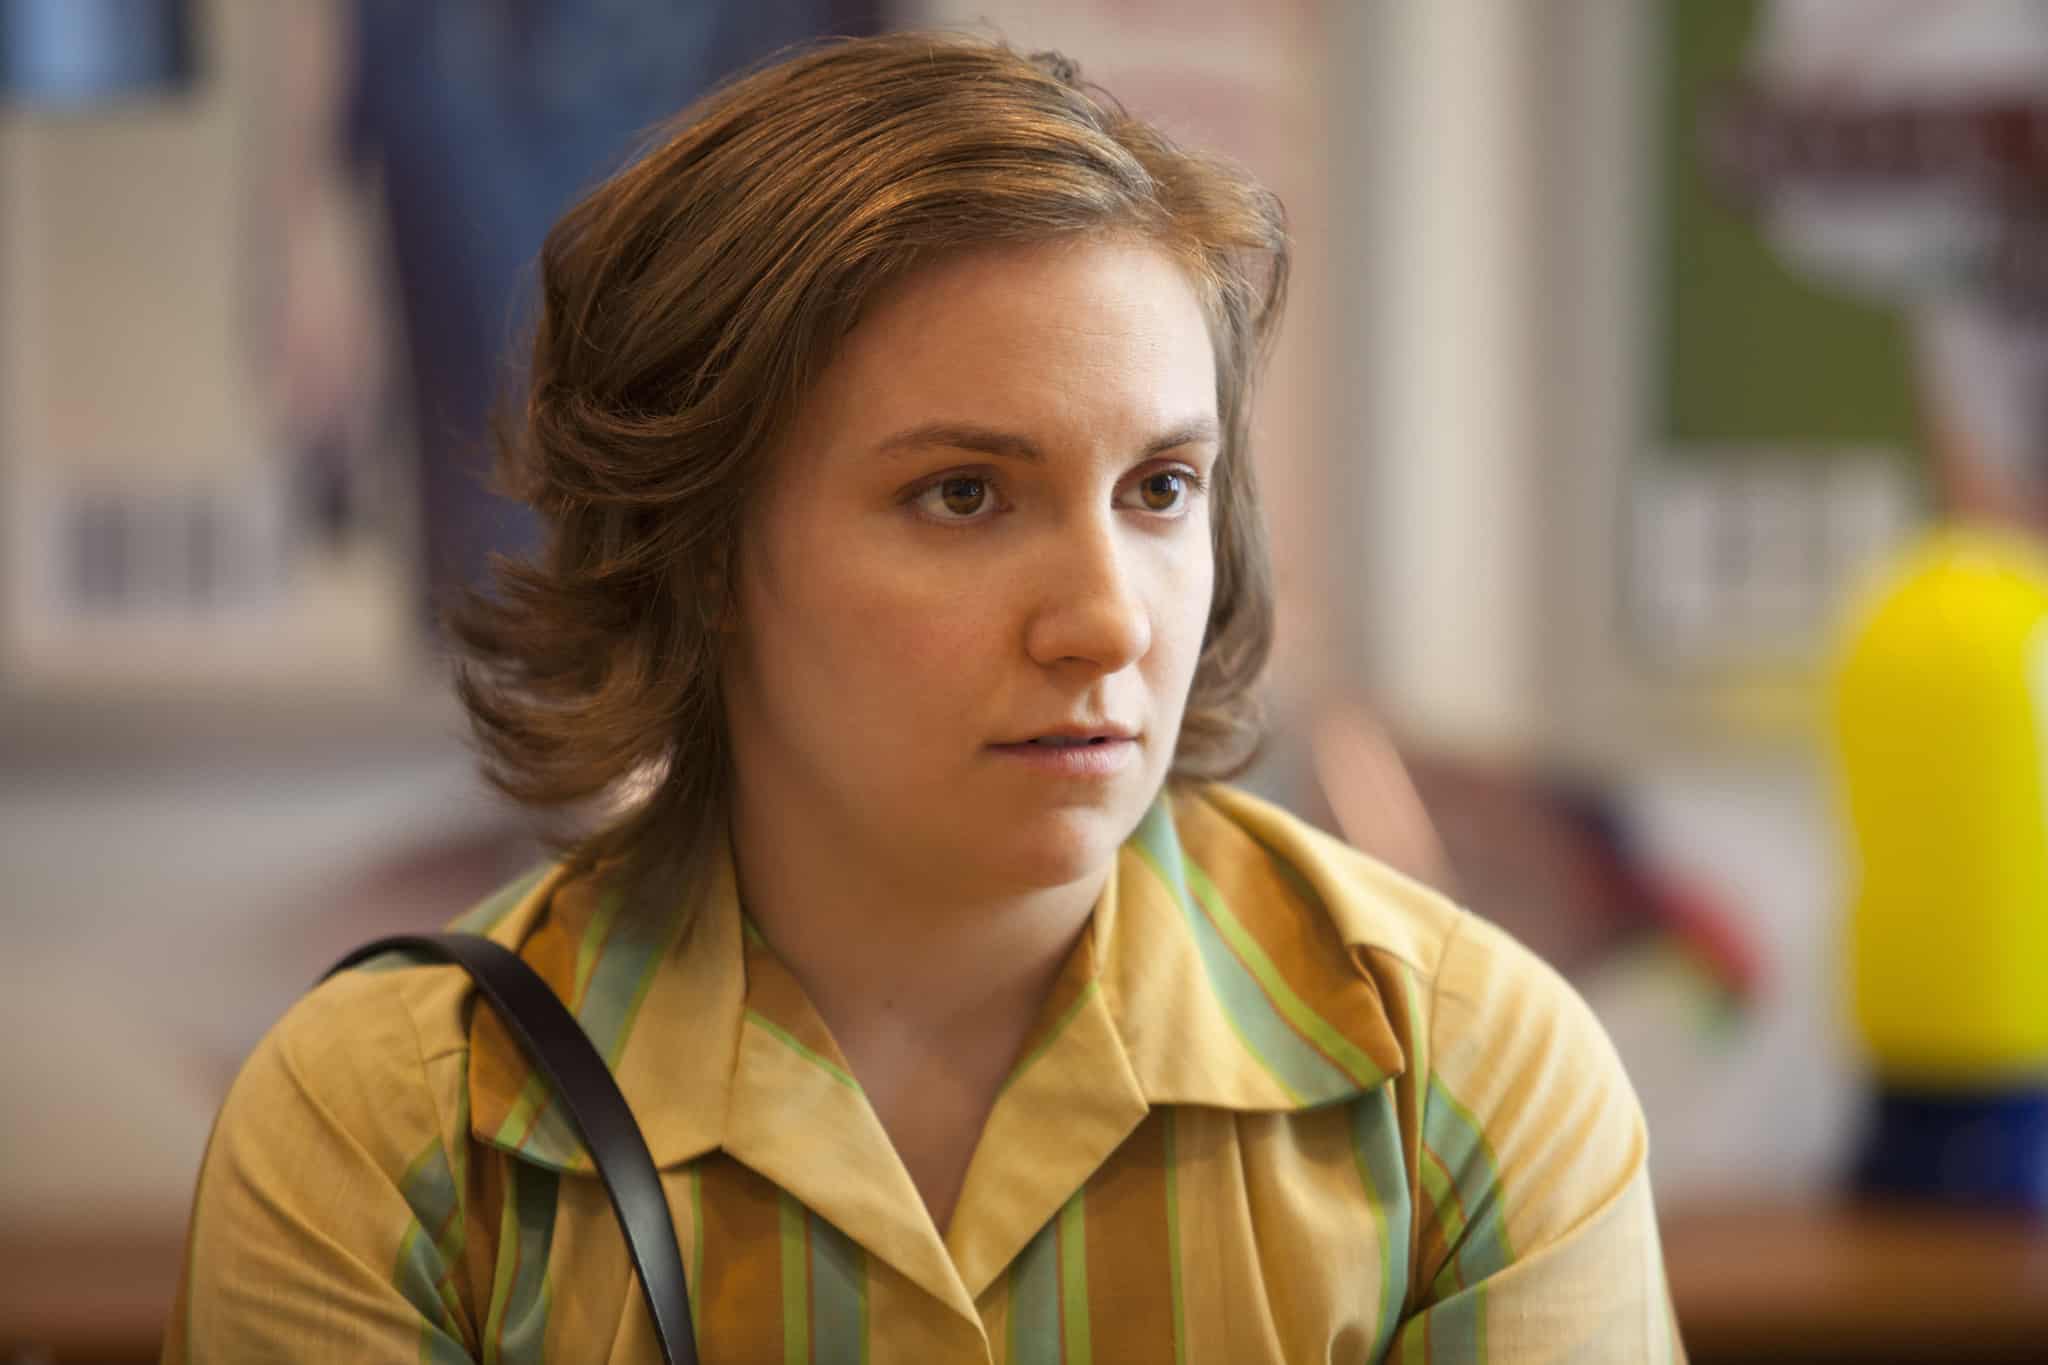 A young woman stares pointedly in this image from Apatow Productions.